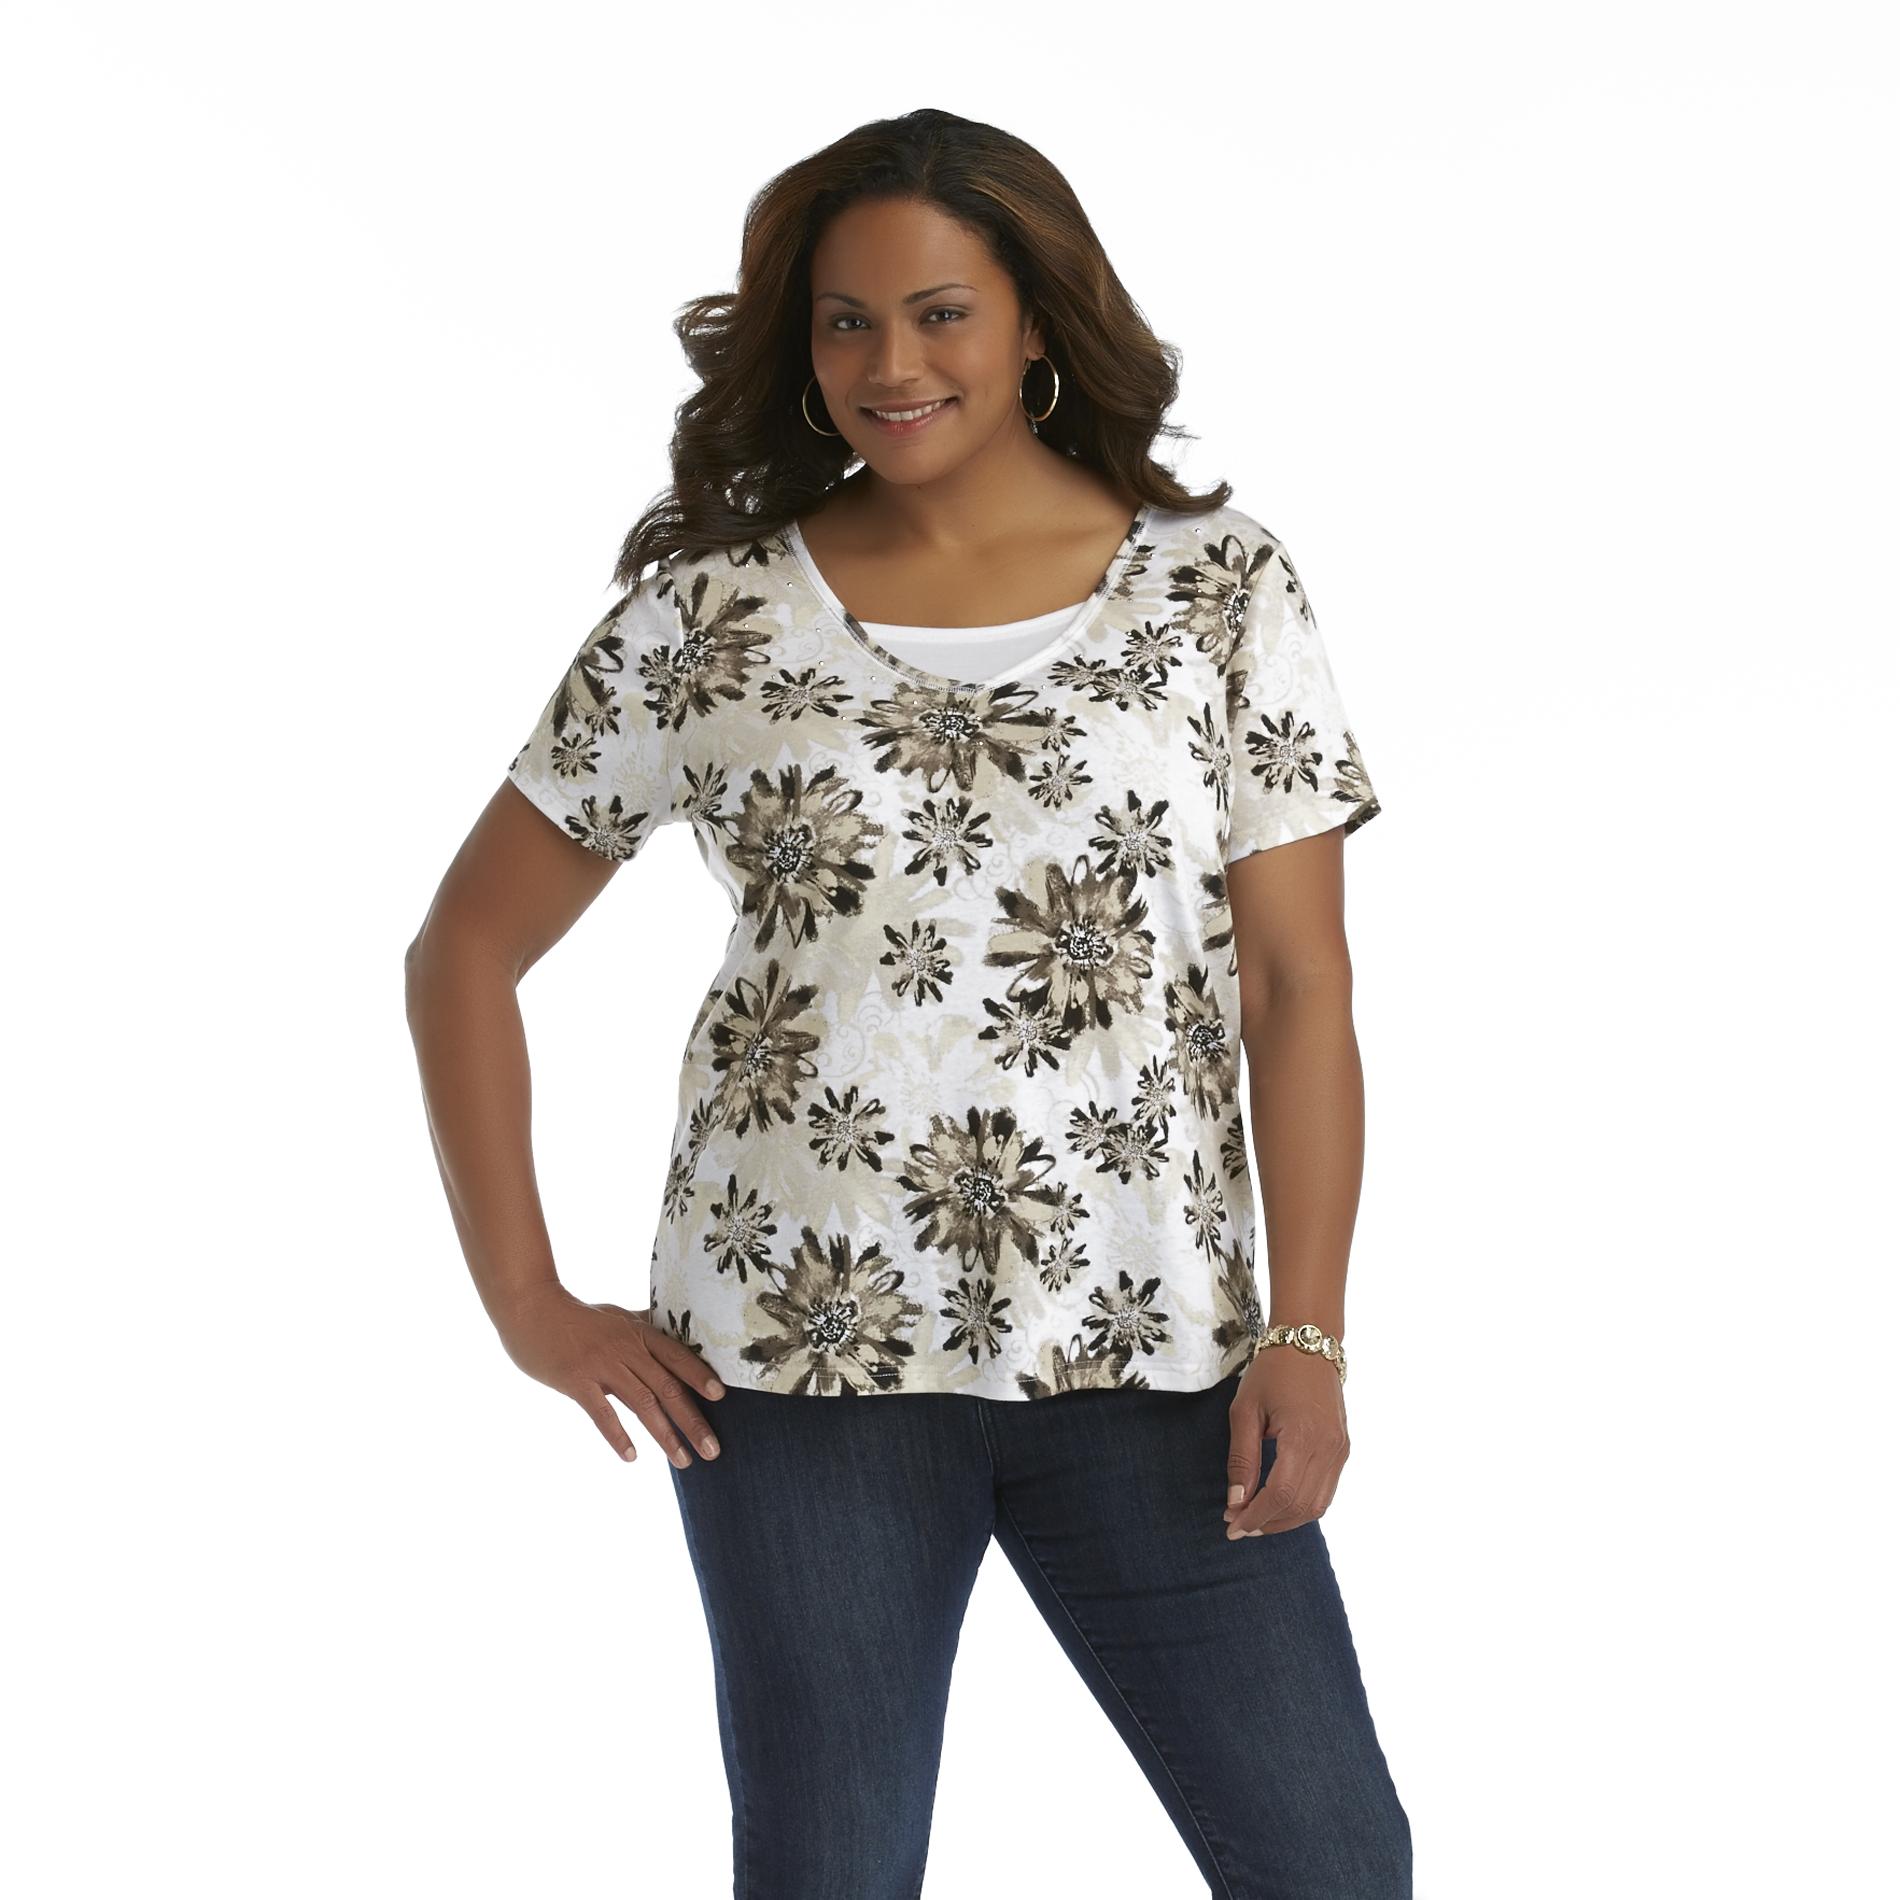 Basic Editions Women's Plus Layered V-Neck Top - Floral